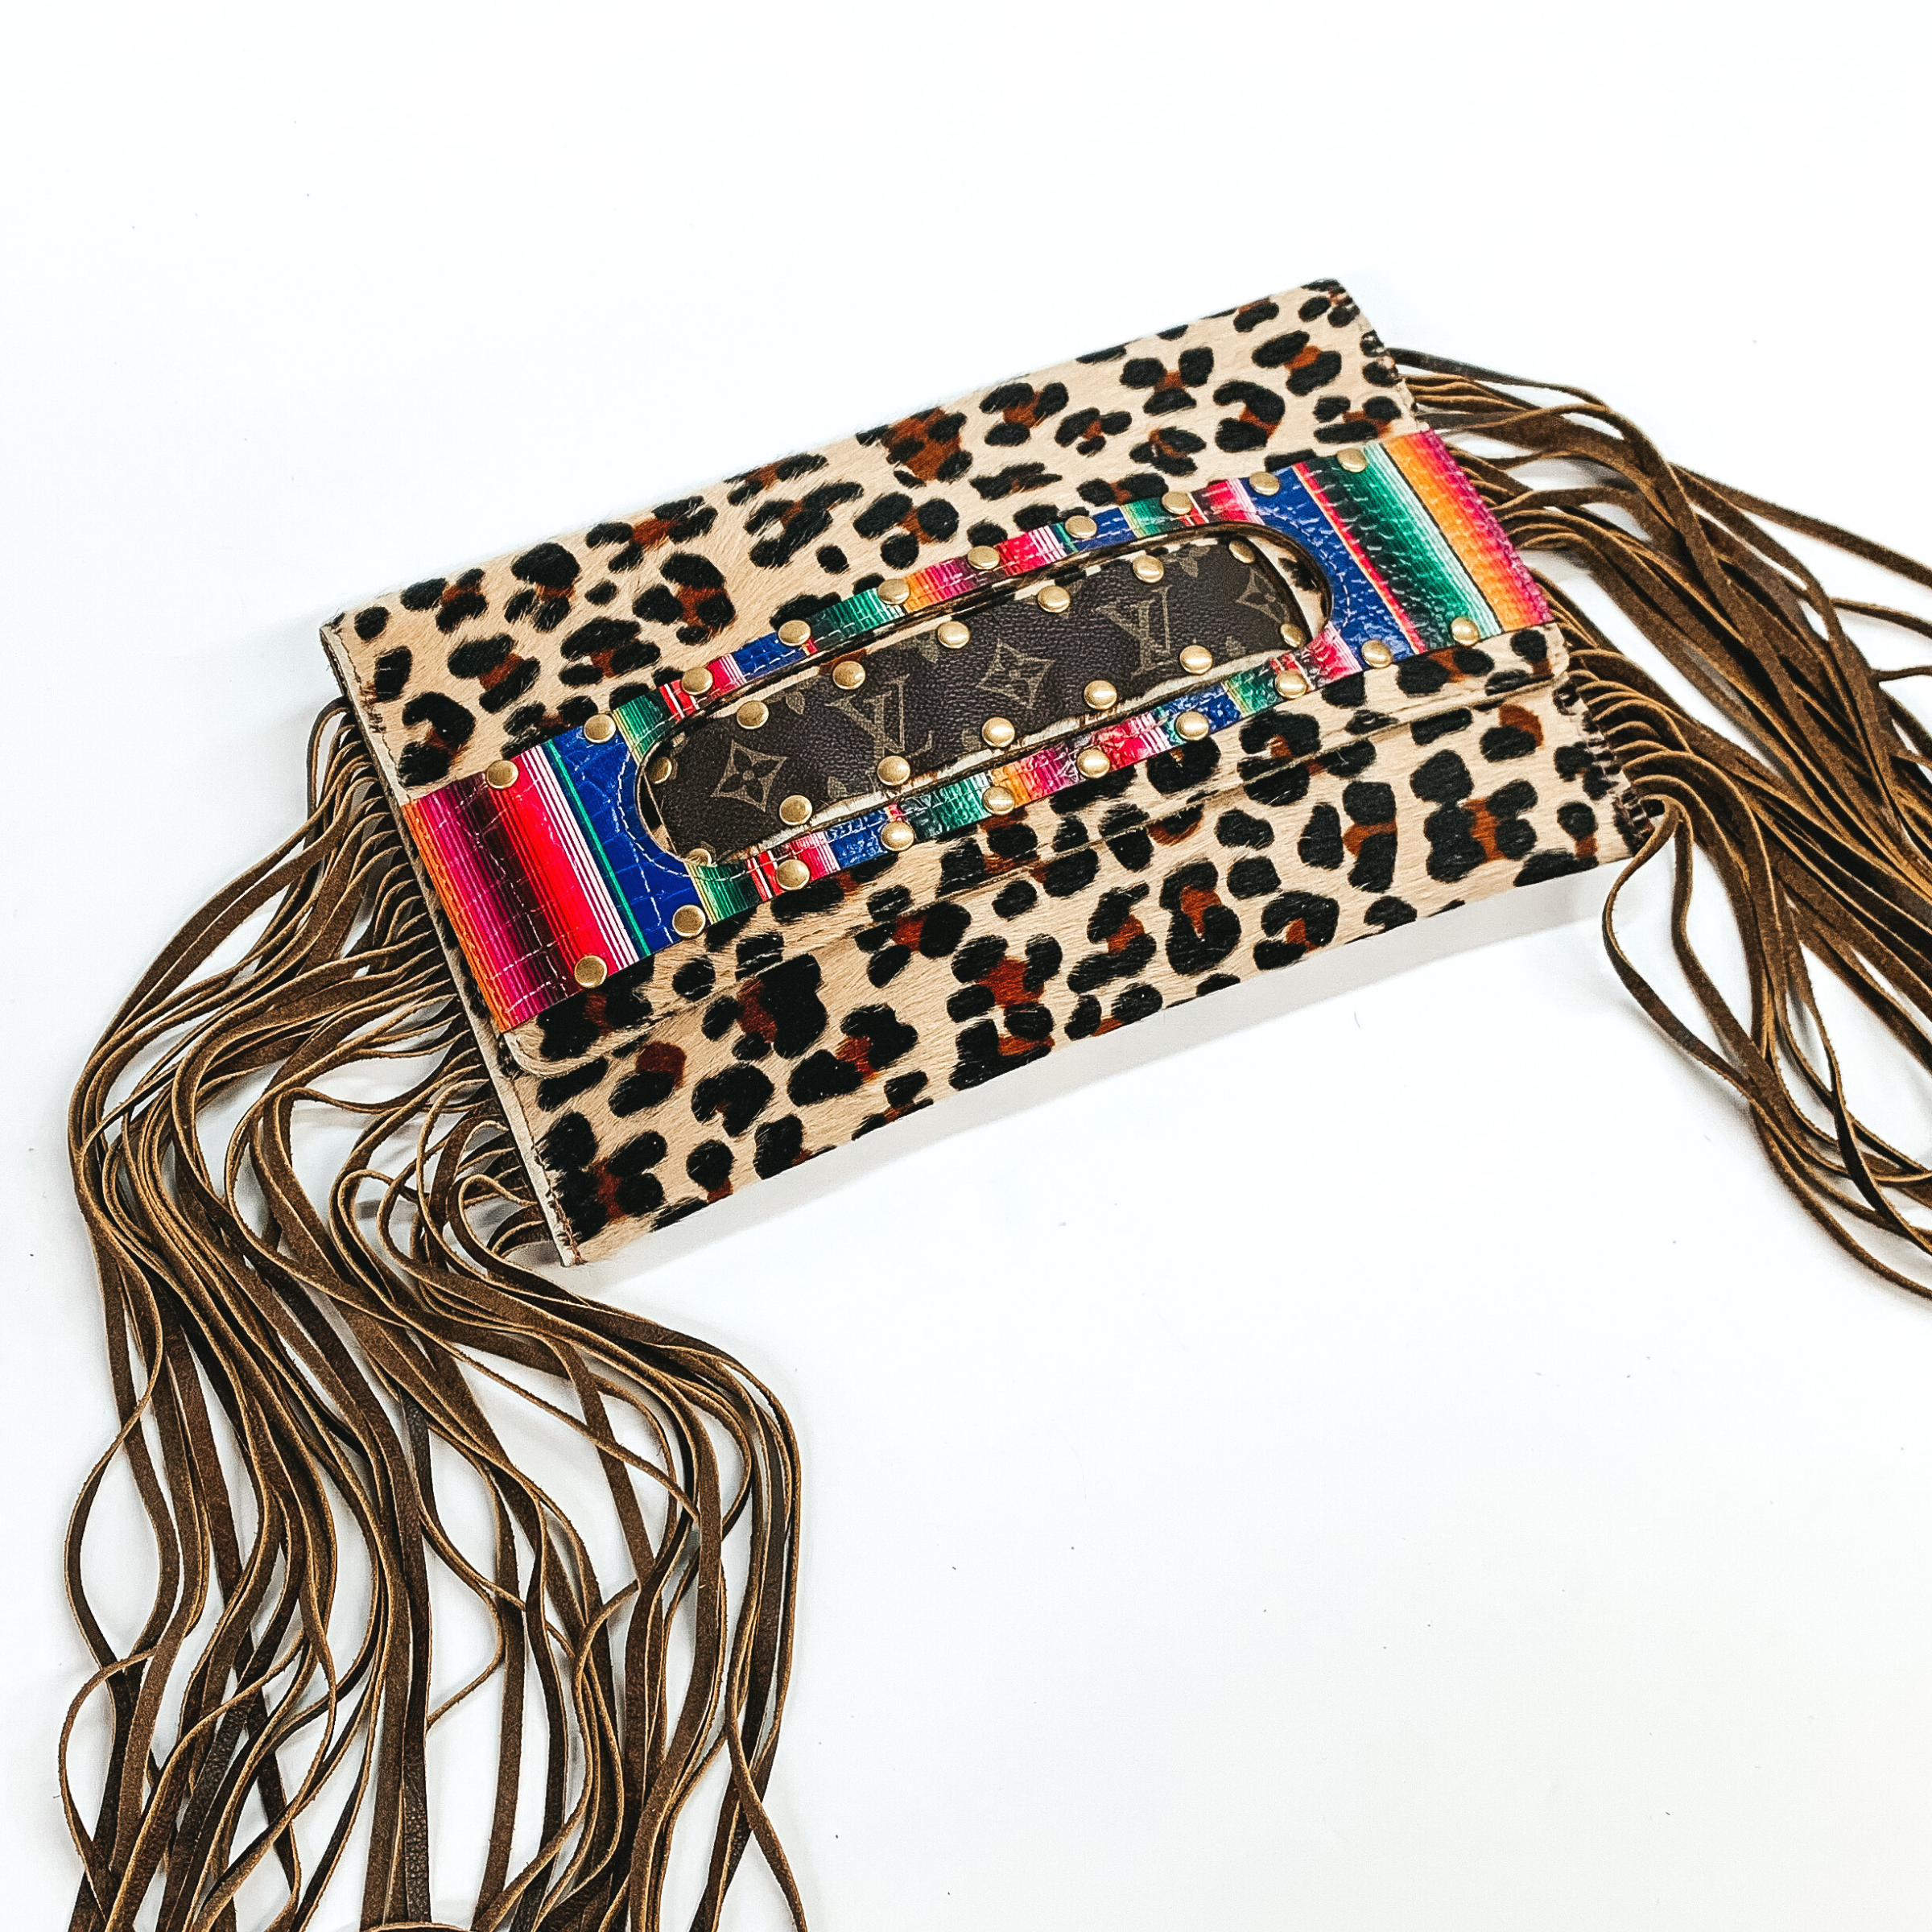 Keep It Gypsy | Sloan Leopard Print Clutch with Serape Design and Genuine Leather Fringe - Giddy Up Glamour Boutique